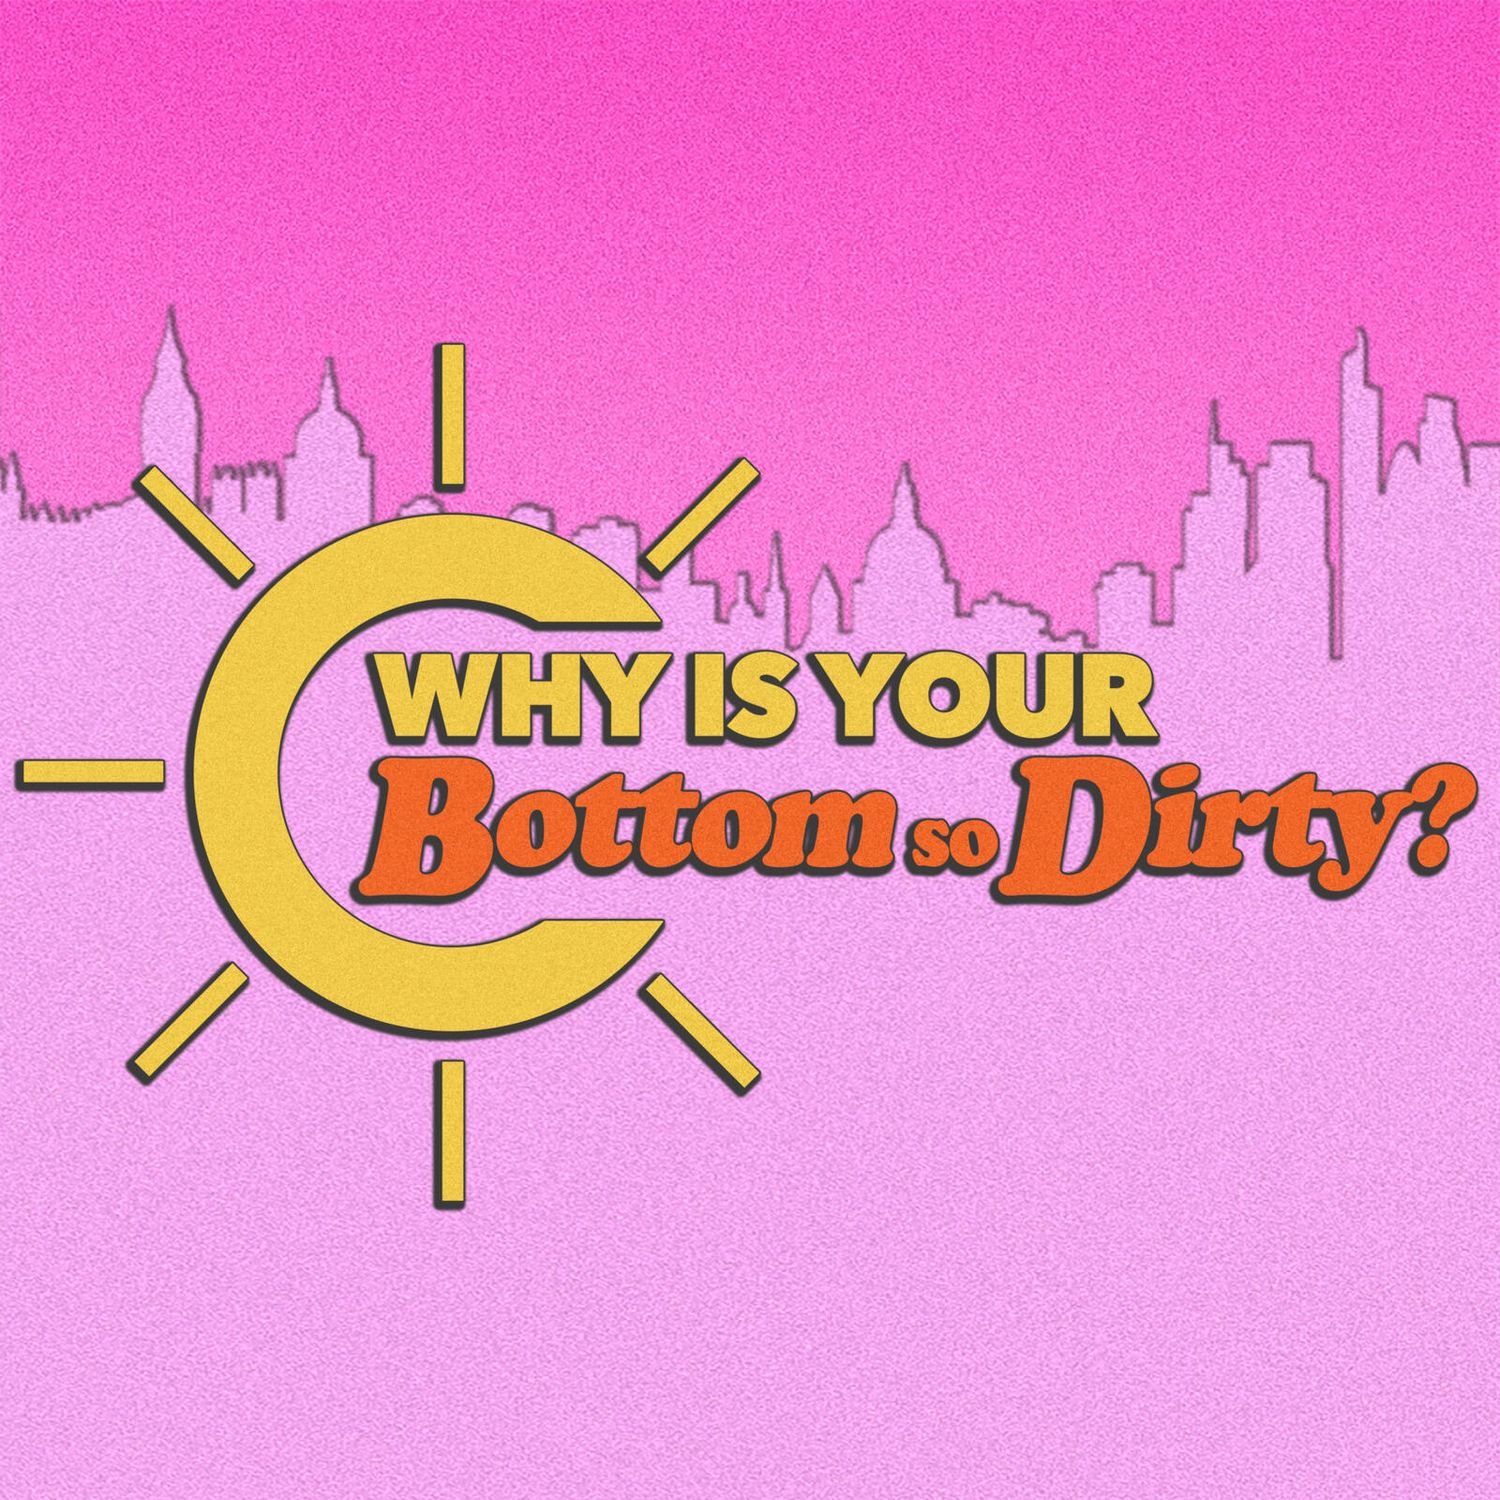 Why Is Your Bottom So Dirty? – Trailer